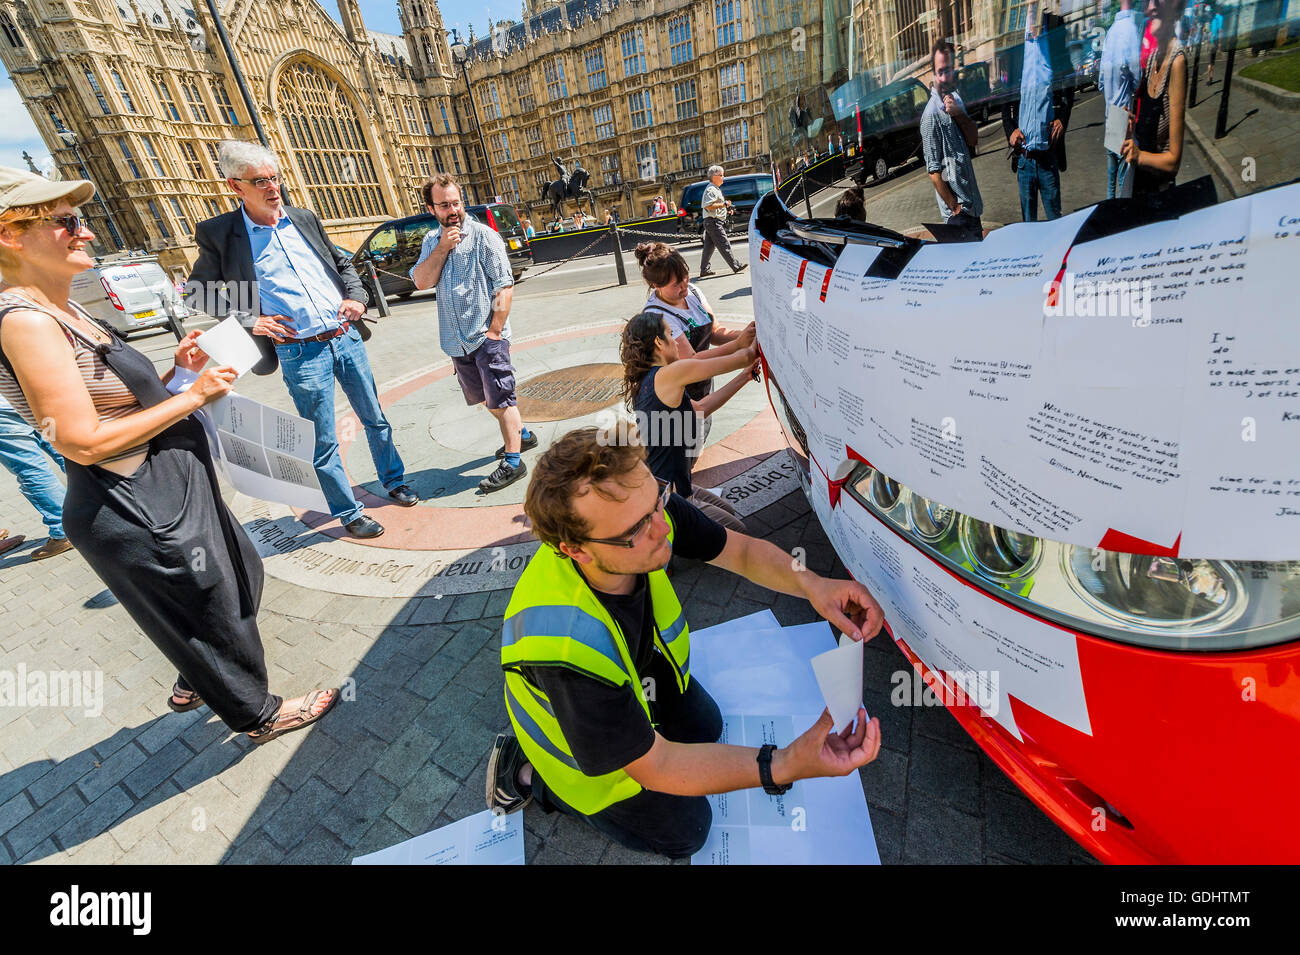 London, UK. 18th July, 2016. John Sauven, executive director of Greenpeace UK, watches as the front of the bus is covered in messages -  The Brexit ‘Vote Leave’ battle bus (used by Boris Johnson) has been acquired by Greenpeace was re-branded outside Parliament. The £350m NHS claim was covered with thousands of questions for the new government from Leave and Remain voters – many of them about what Brexit means for the environment. The questions, written on stickers, are forming a montage that will spell out the words ‘TIME FOR TRUTH’ in huge white letters on the side of the bus. The bus was pa Stock Photo